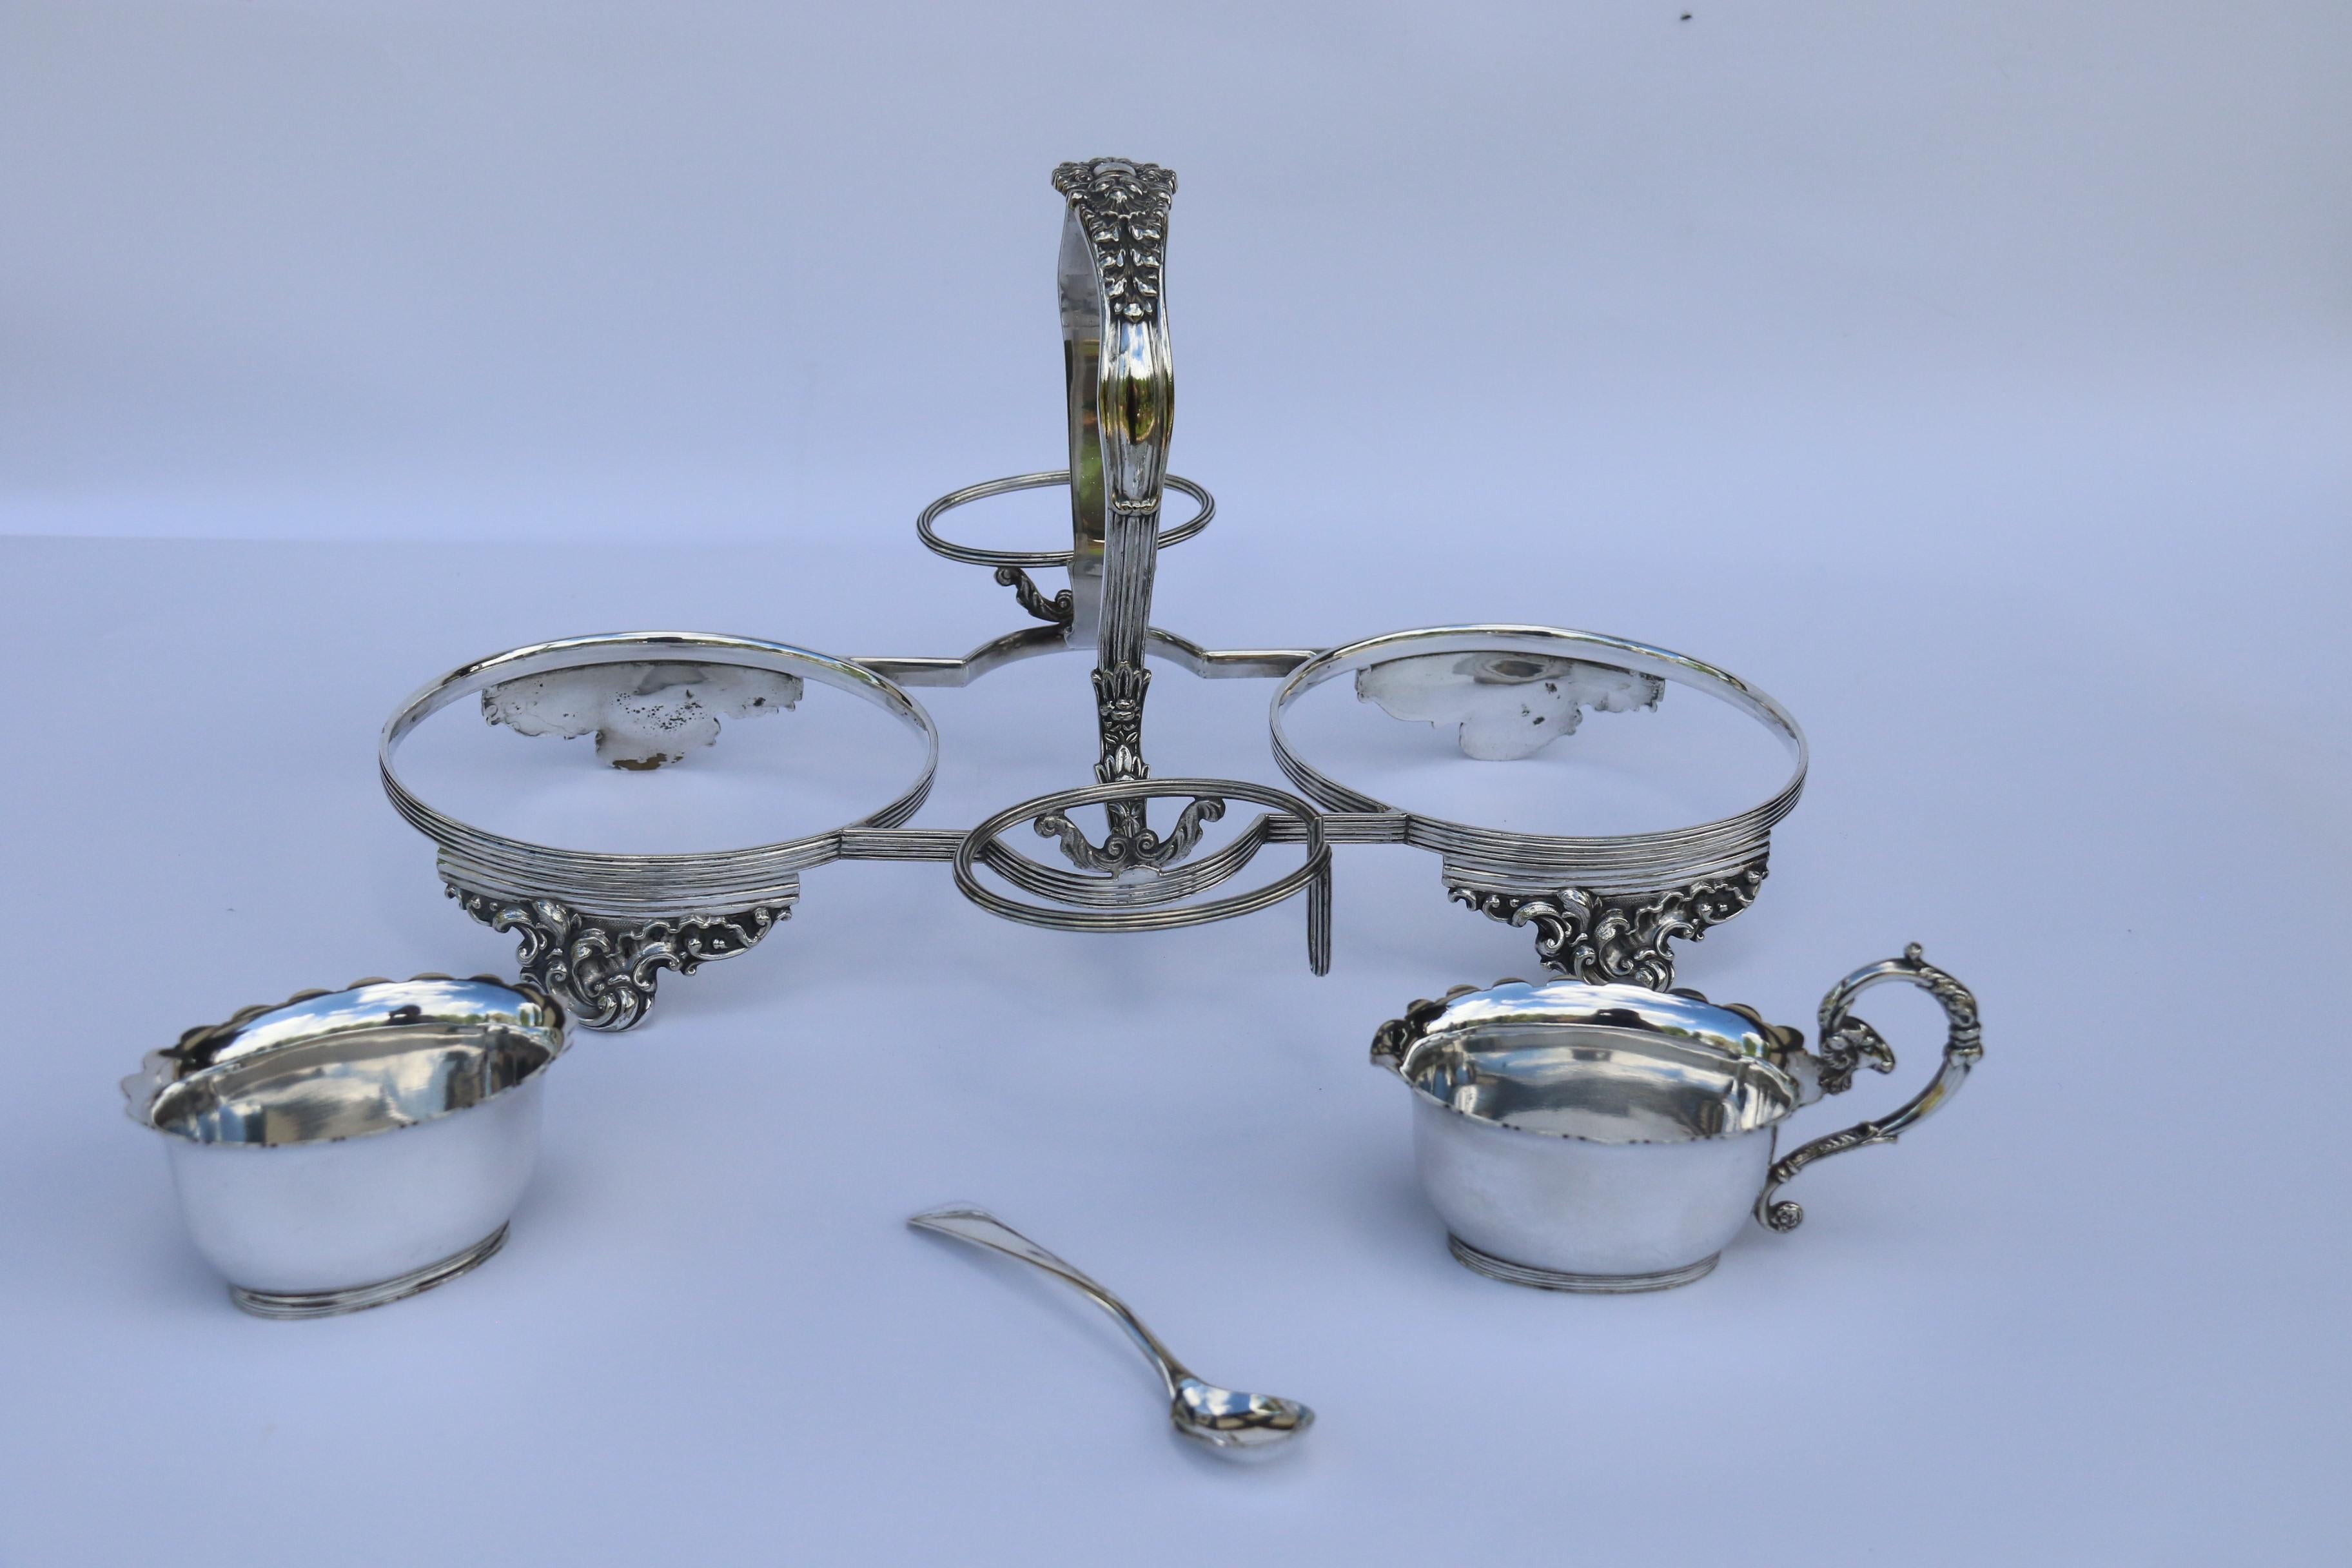 Doulton Burslem  and Walker and Hall strawberry dessert set for two people C1900 For Sale 9